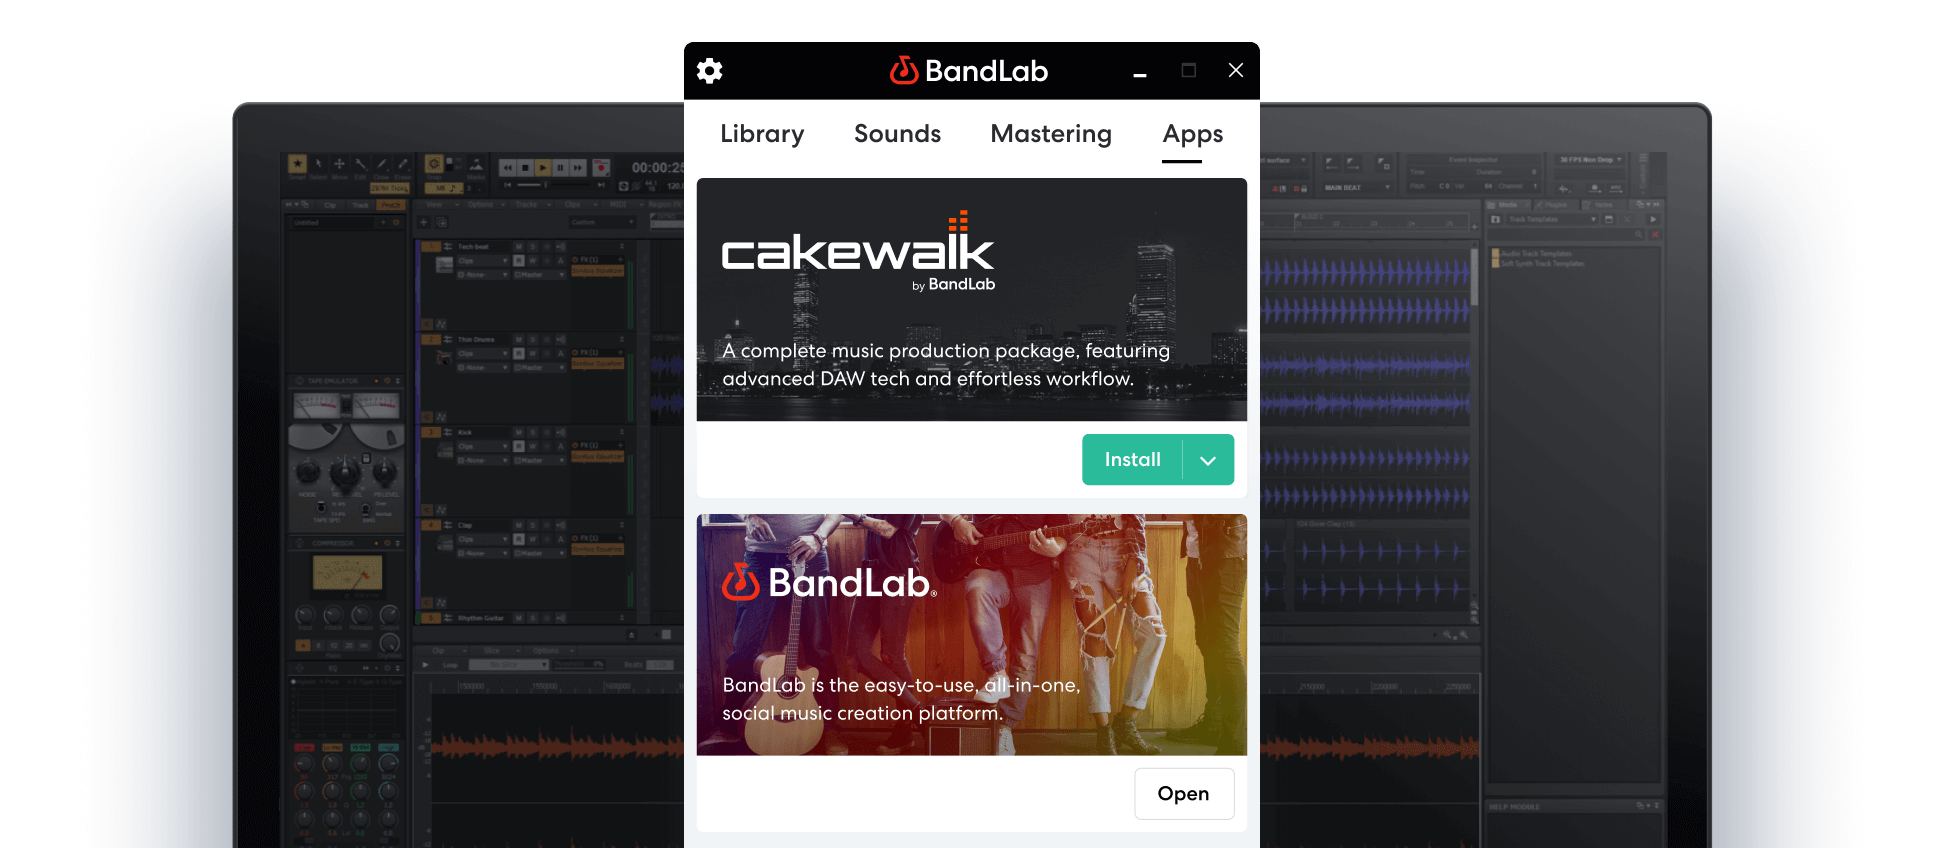 Cakewalk by BandLab 29.09.0.062 instal the new version for windows